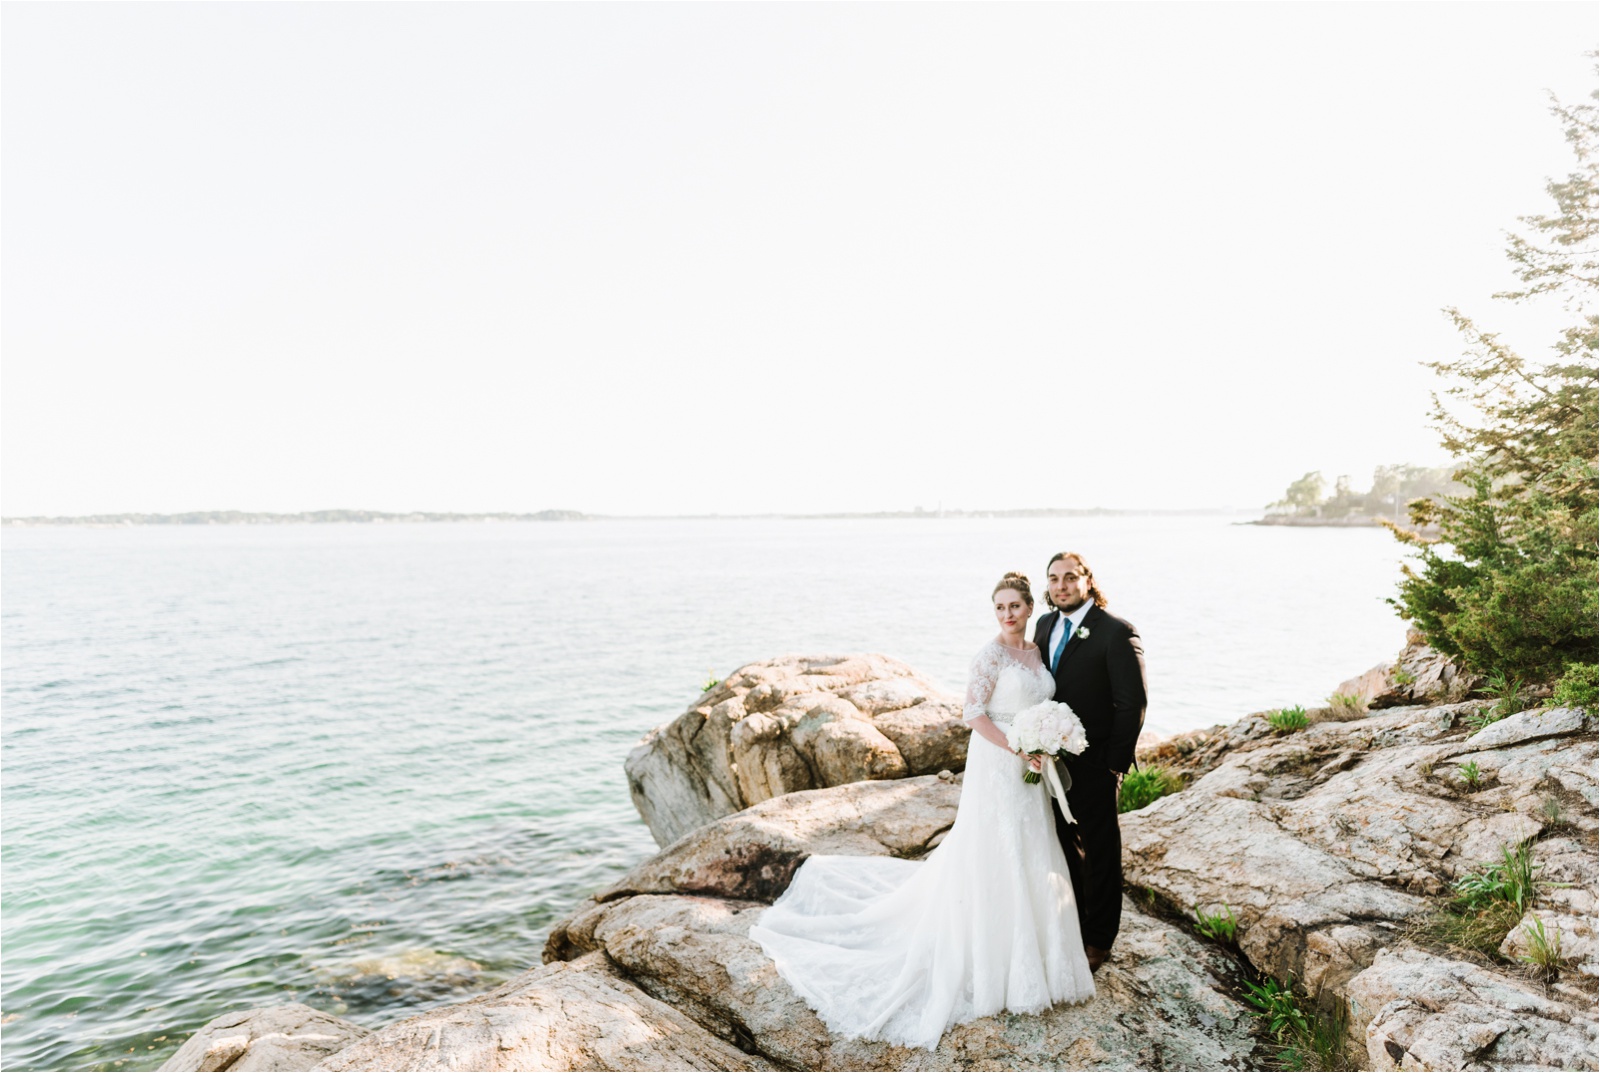 Lush Preppy Wedding at Misselwood at Endicott College in Beverly, MA by Boston Wedding Photographer Annmarie Swift